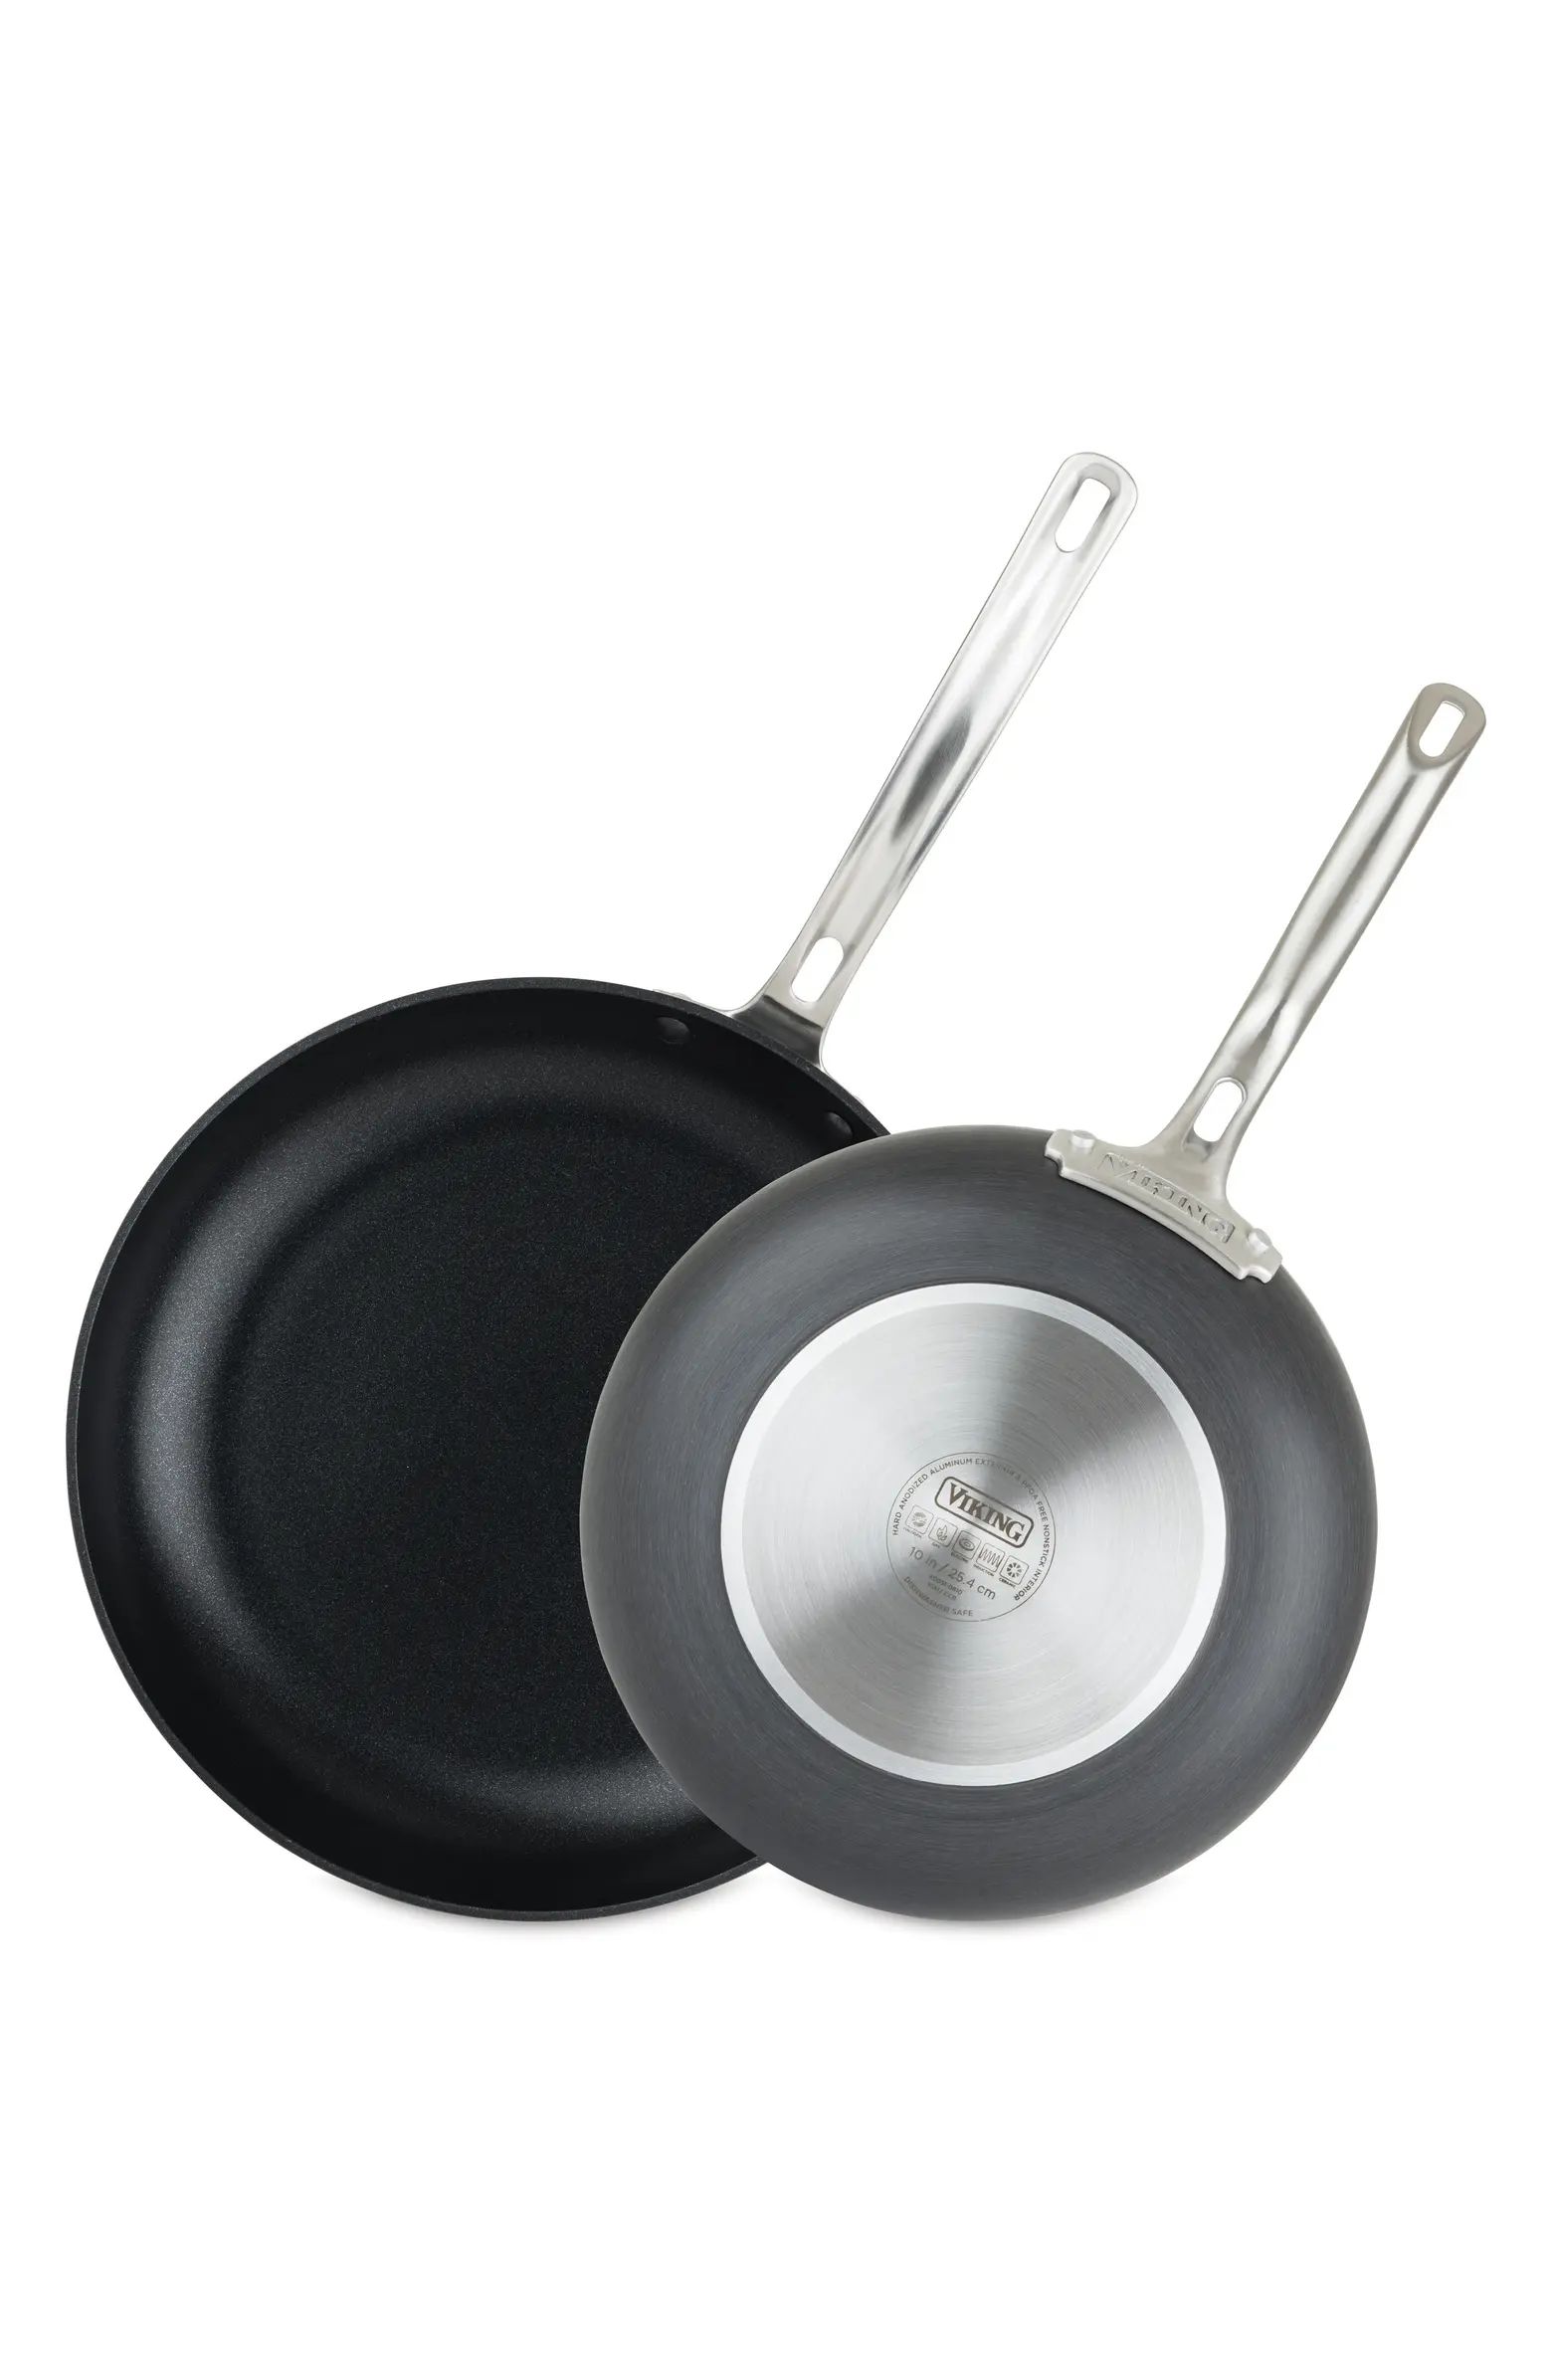 10-Inch & 12-Inch Hard Anodized Nonstick Frying Pan Set | Nordstrom